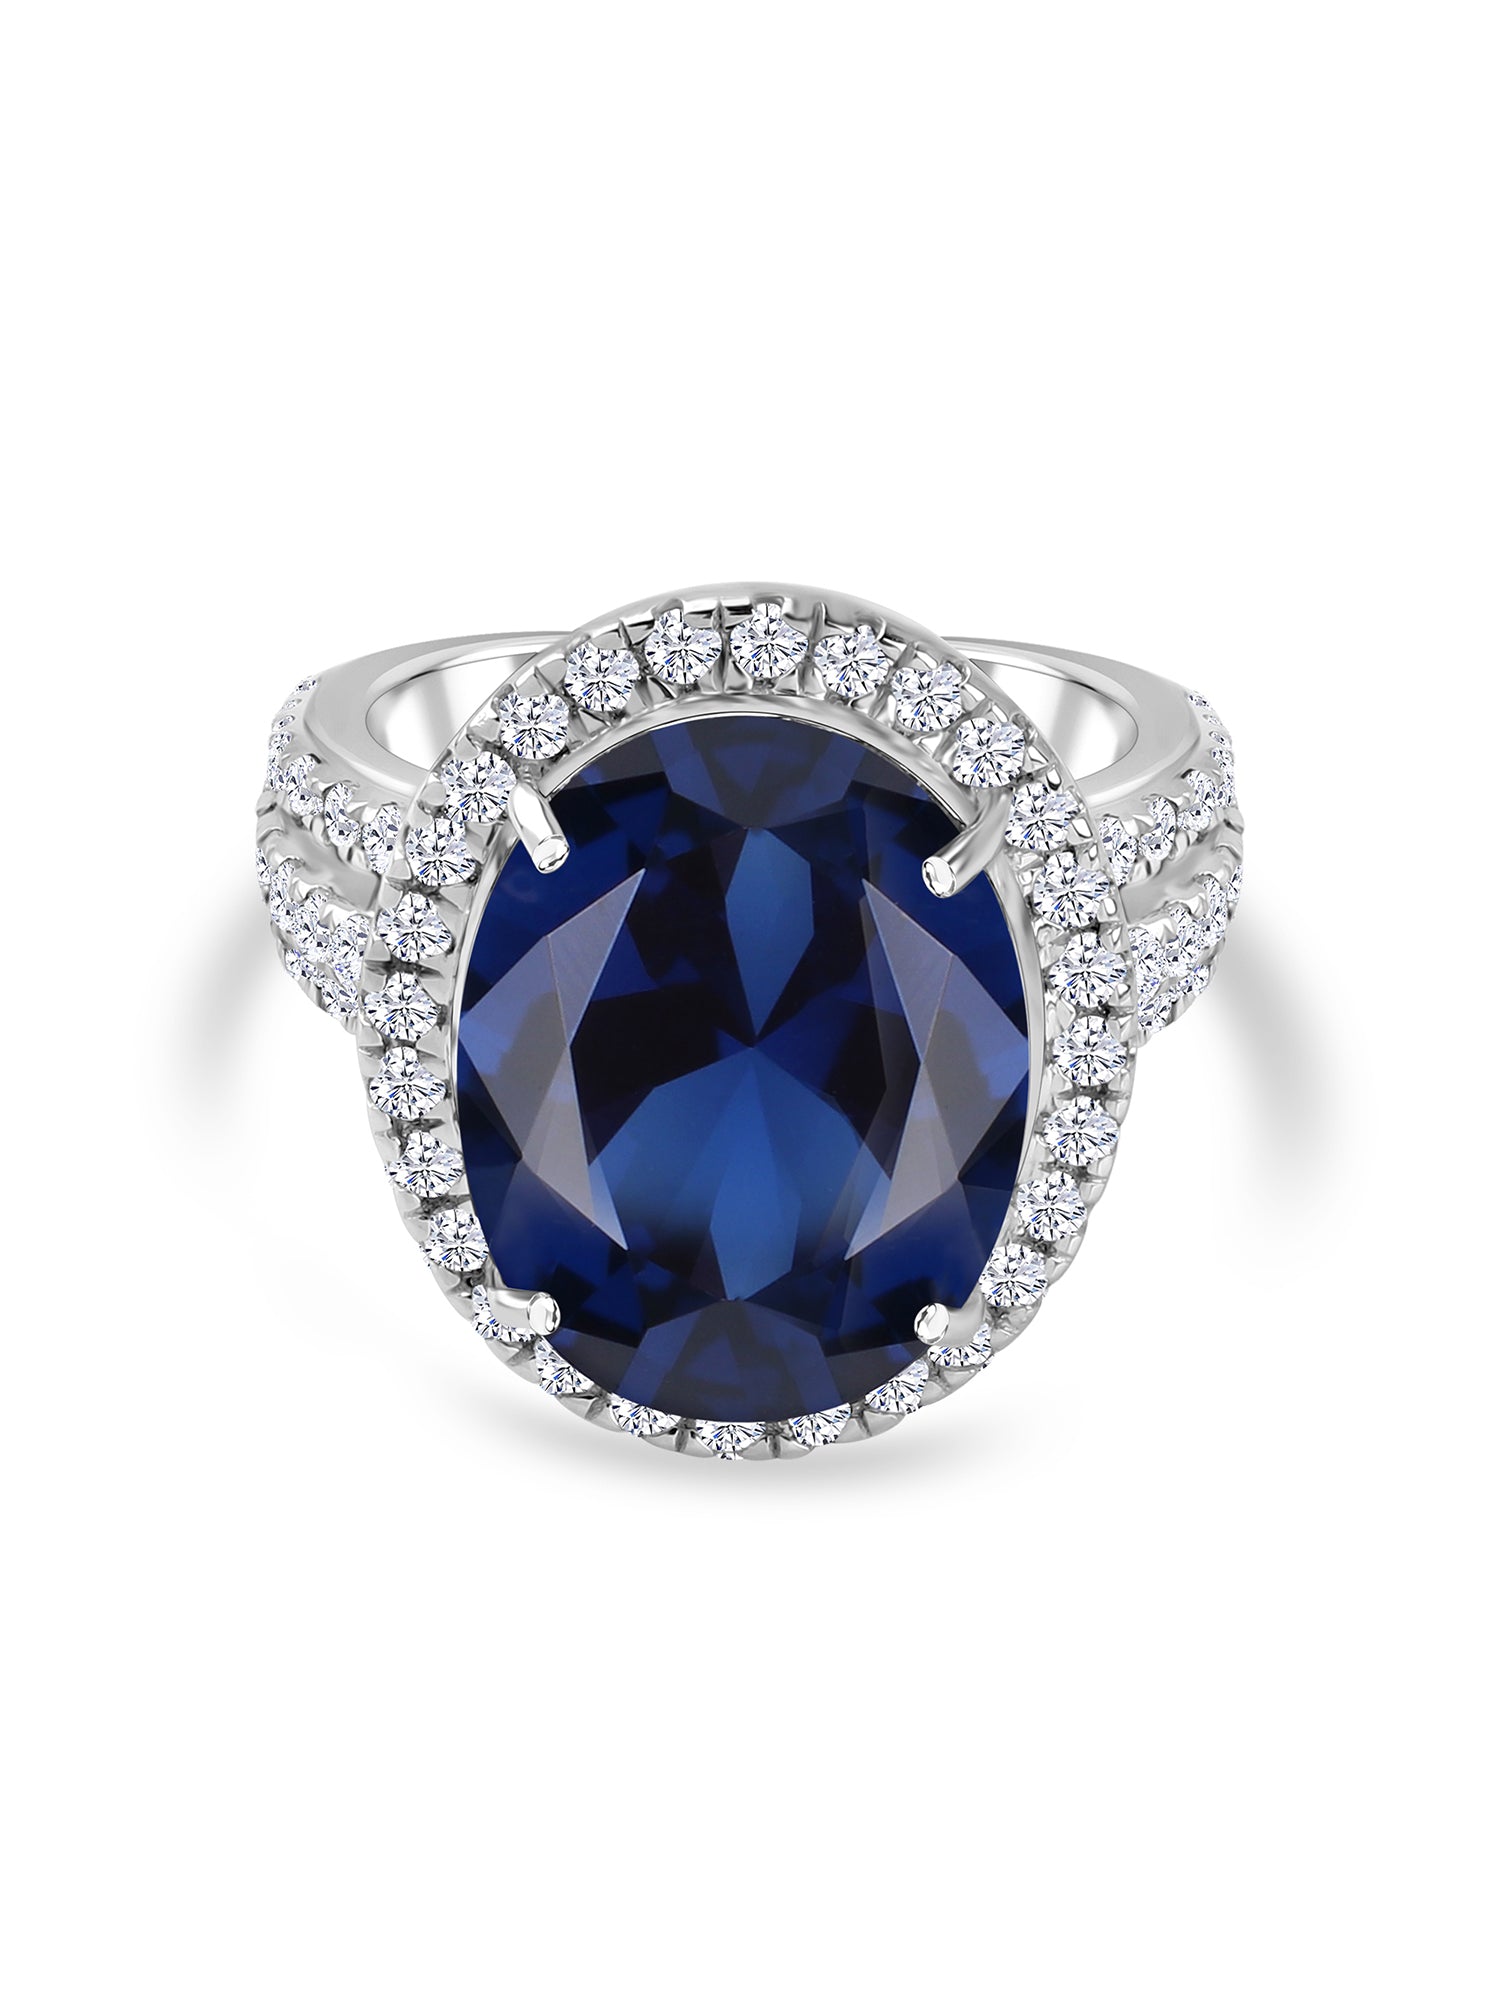 BLUE SAPPHIRE SILVER RING IN OVAL SHAPE-1